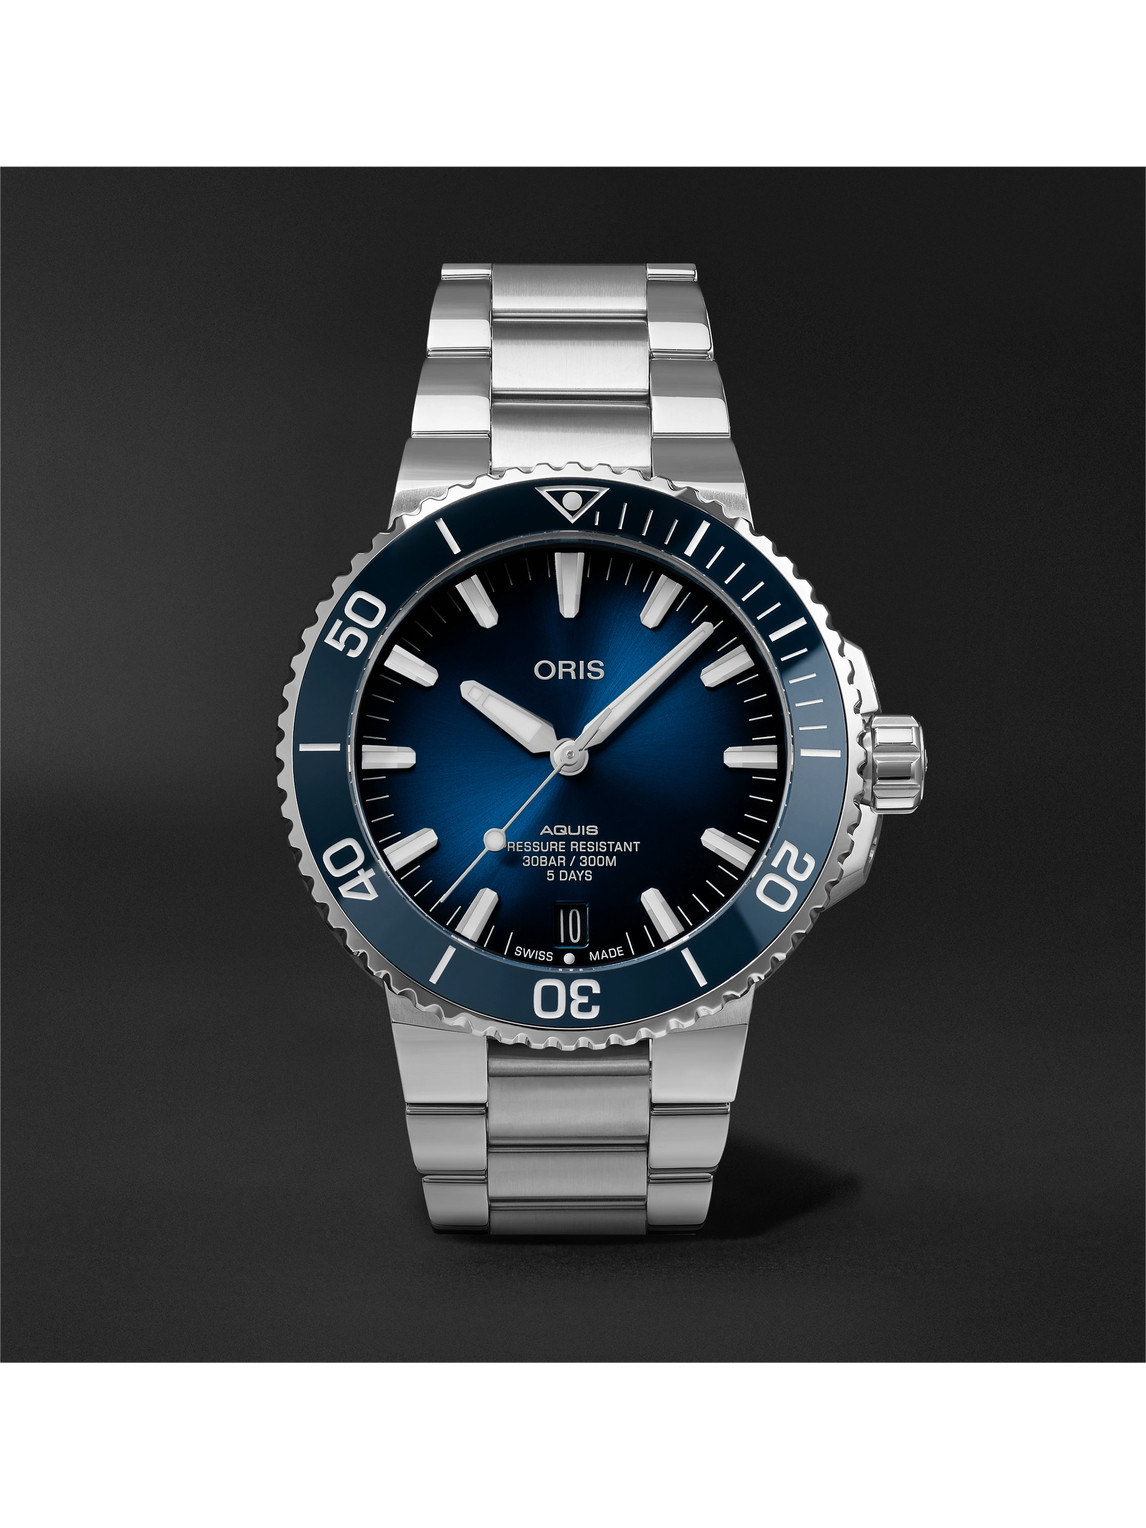 Oris Aquis Date Calibre 400 Automatic 43.5mm Stainless Steel Watch, Ref. No. 01 400 7763 4135-07 8 24 09p In Blue